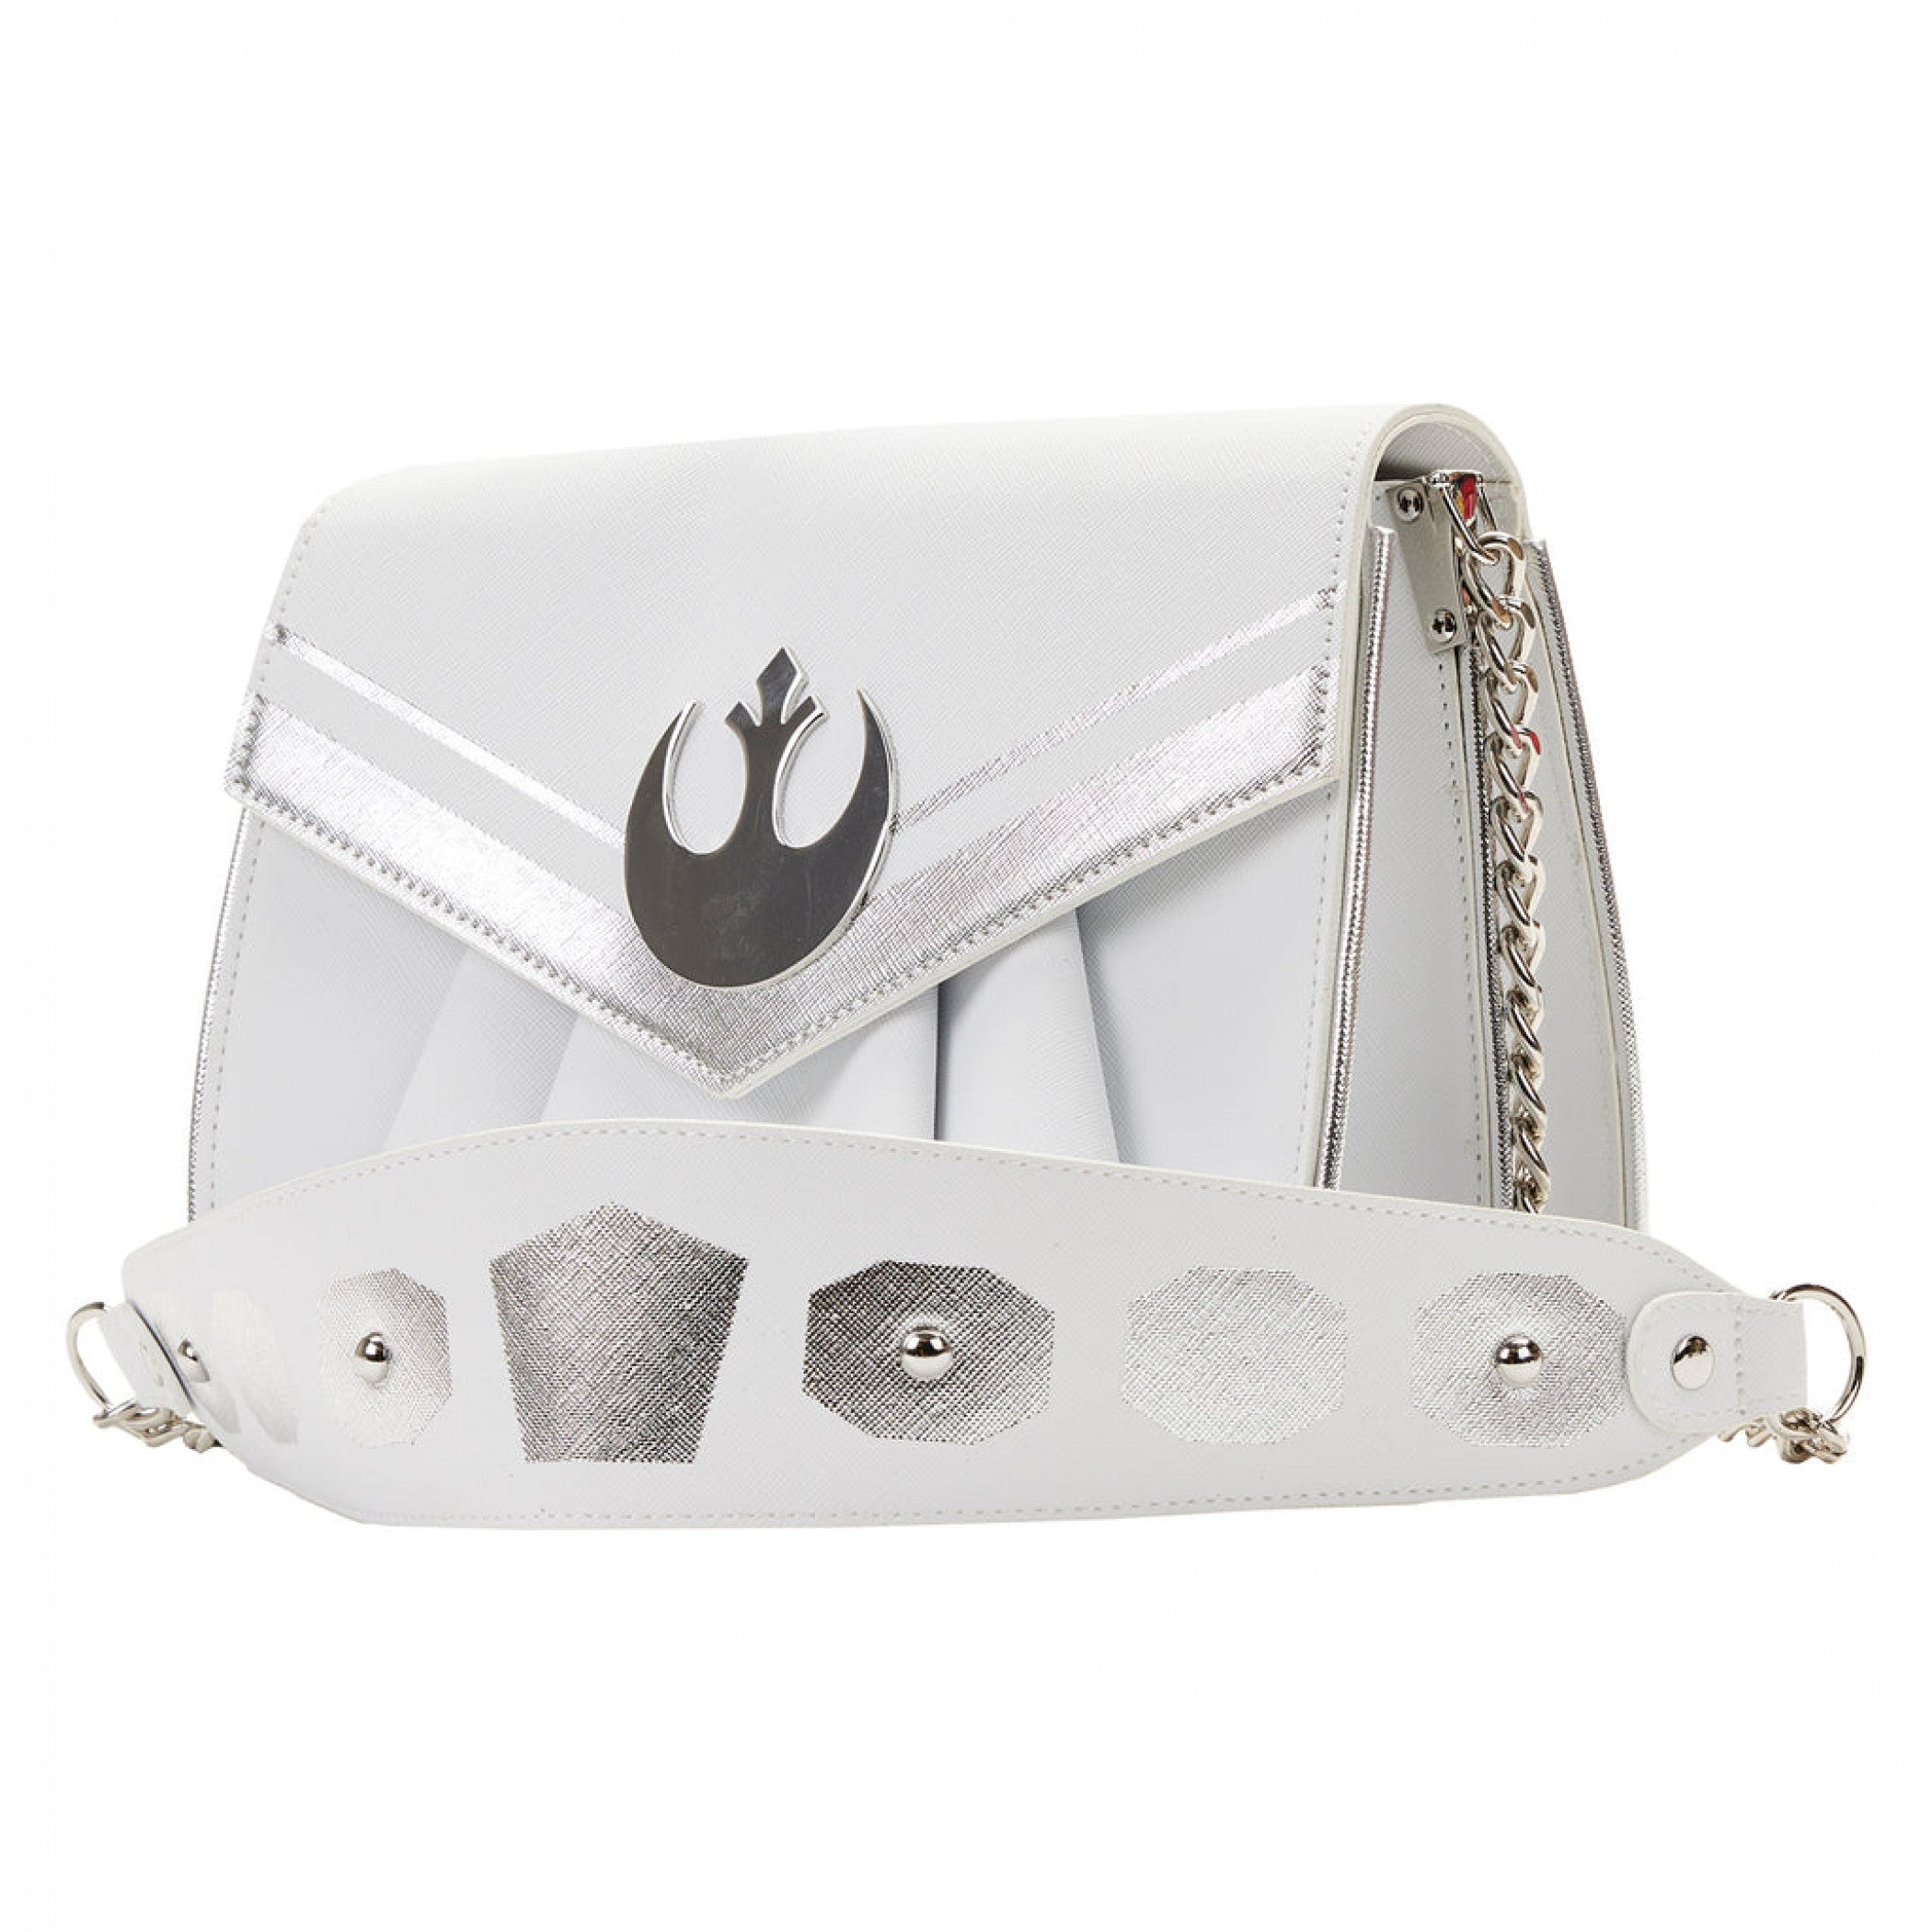 title:Star Wars Princess Leia Cosplay Chain Strap Crossbody Bag by Loungefly;color:White